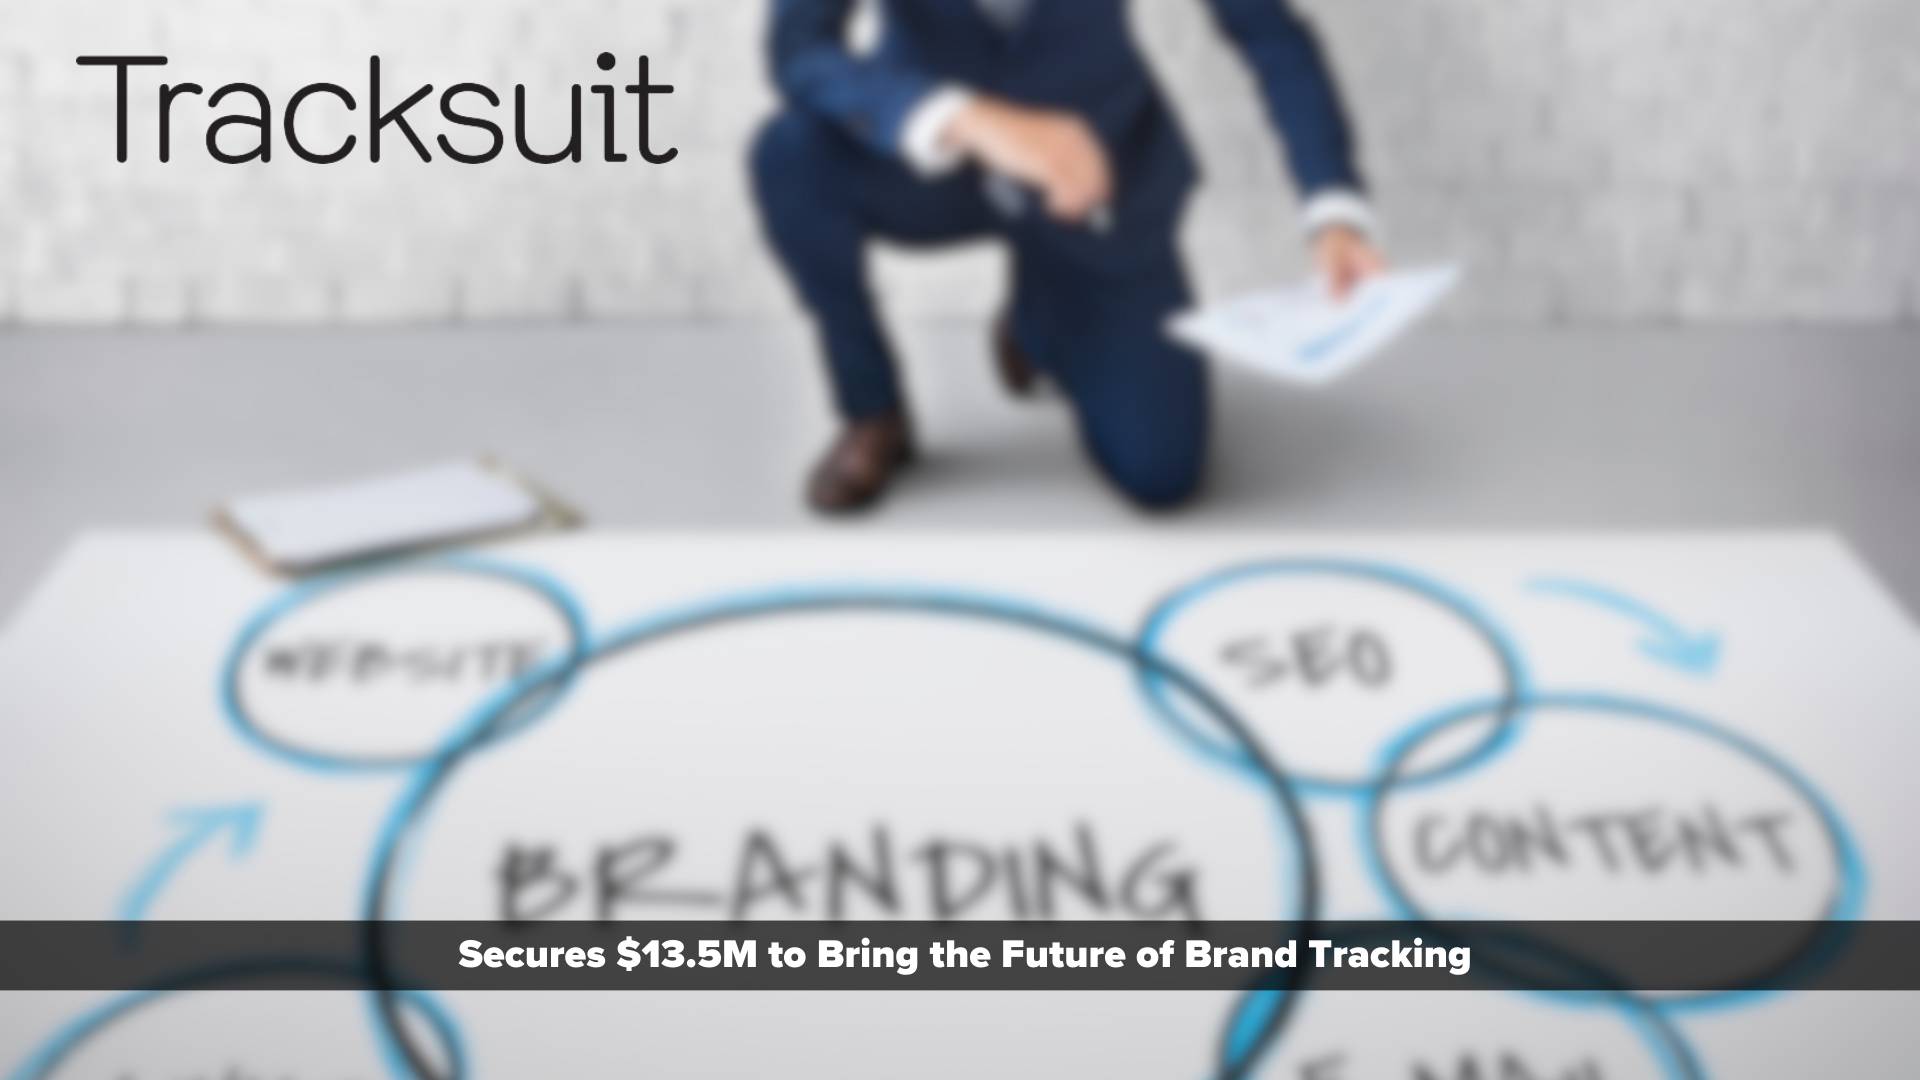 Tracksuit Secures $13.5M to Bring the Future of Brand Tracking to Growing Consumer Brands